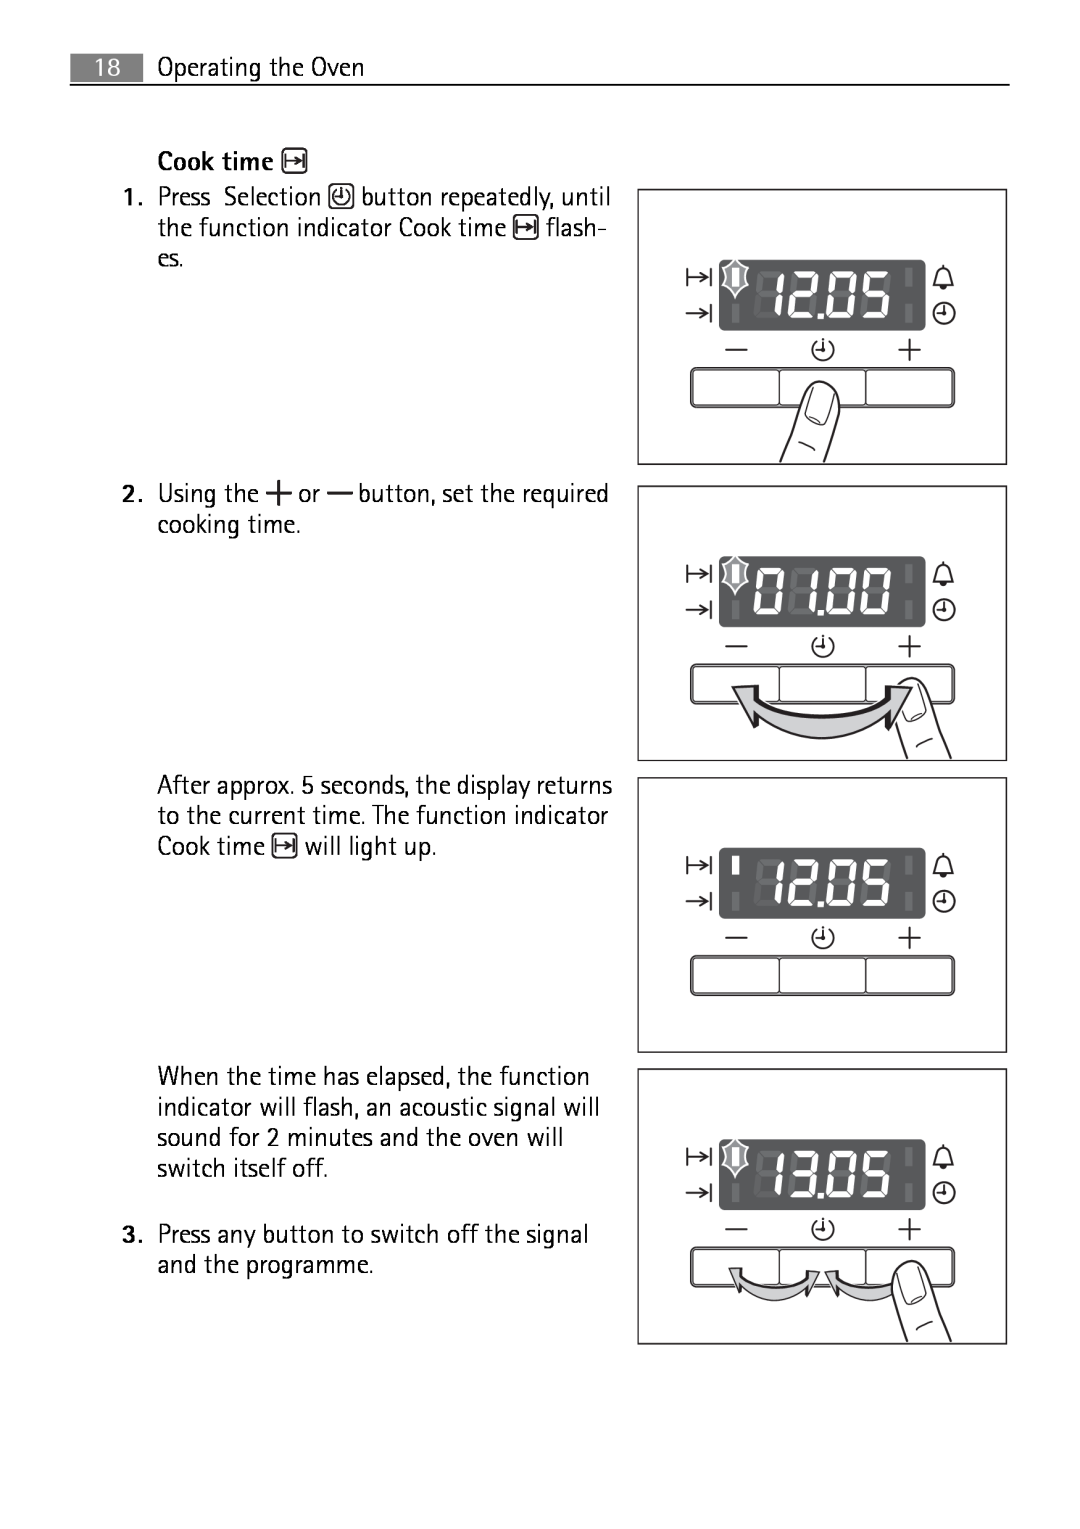 Electrolux B2100-5 user manual Operating the Oven, Cook time 